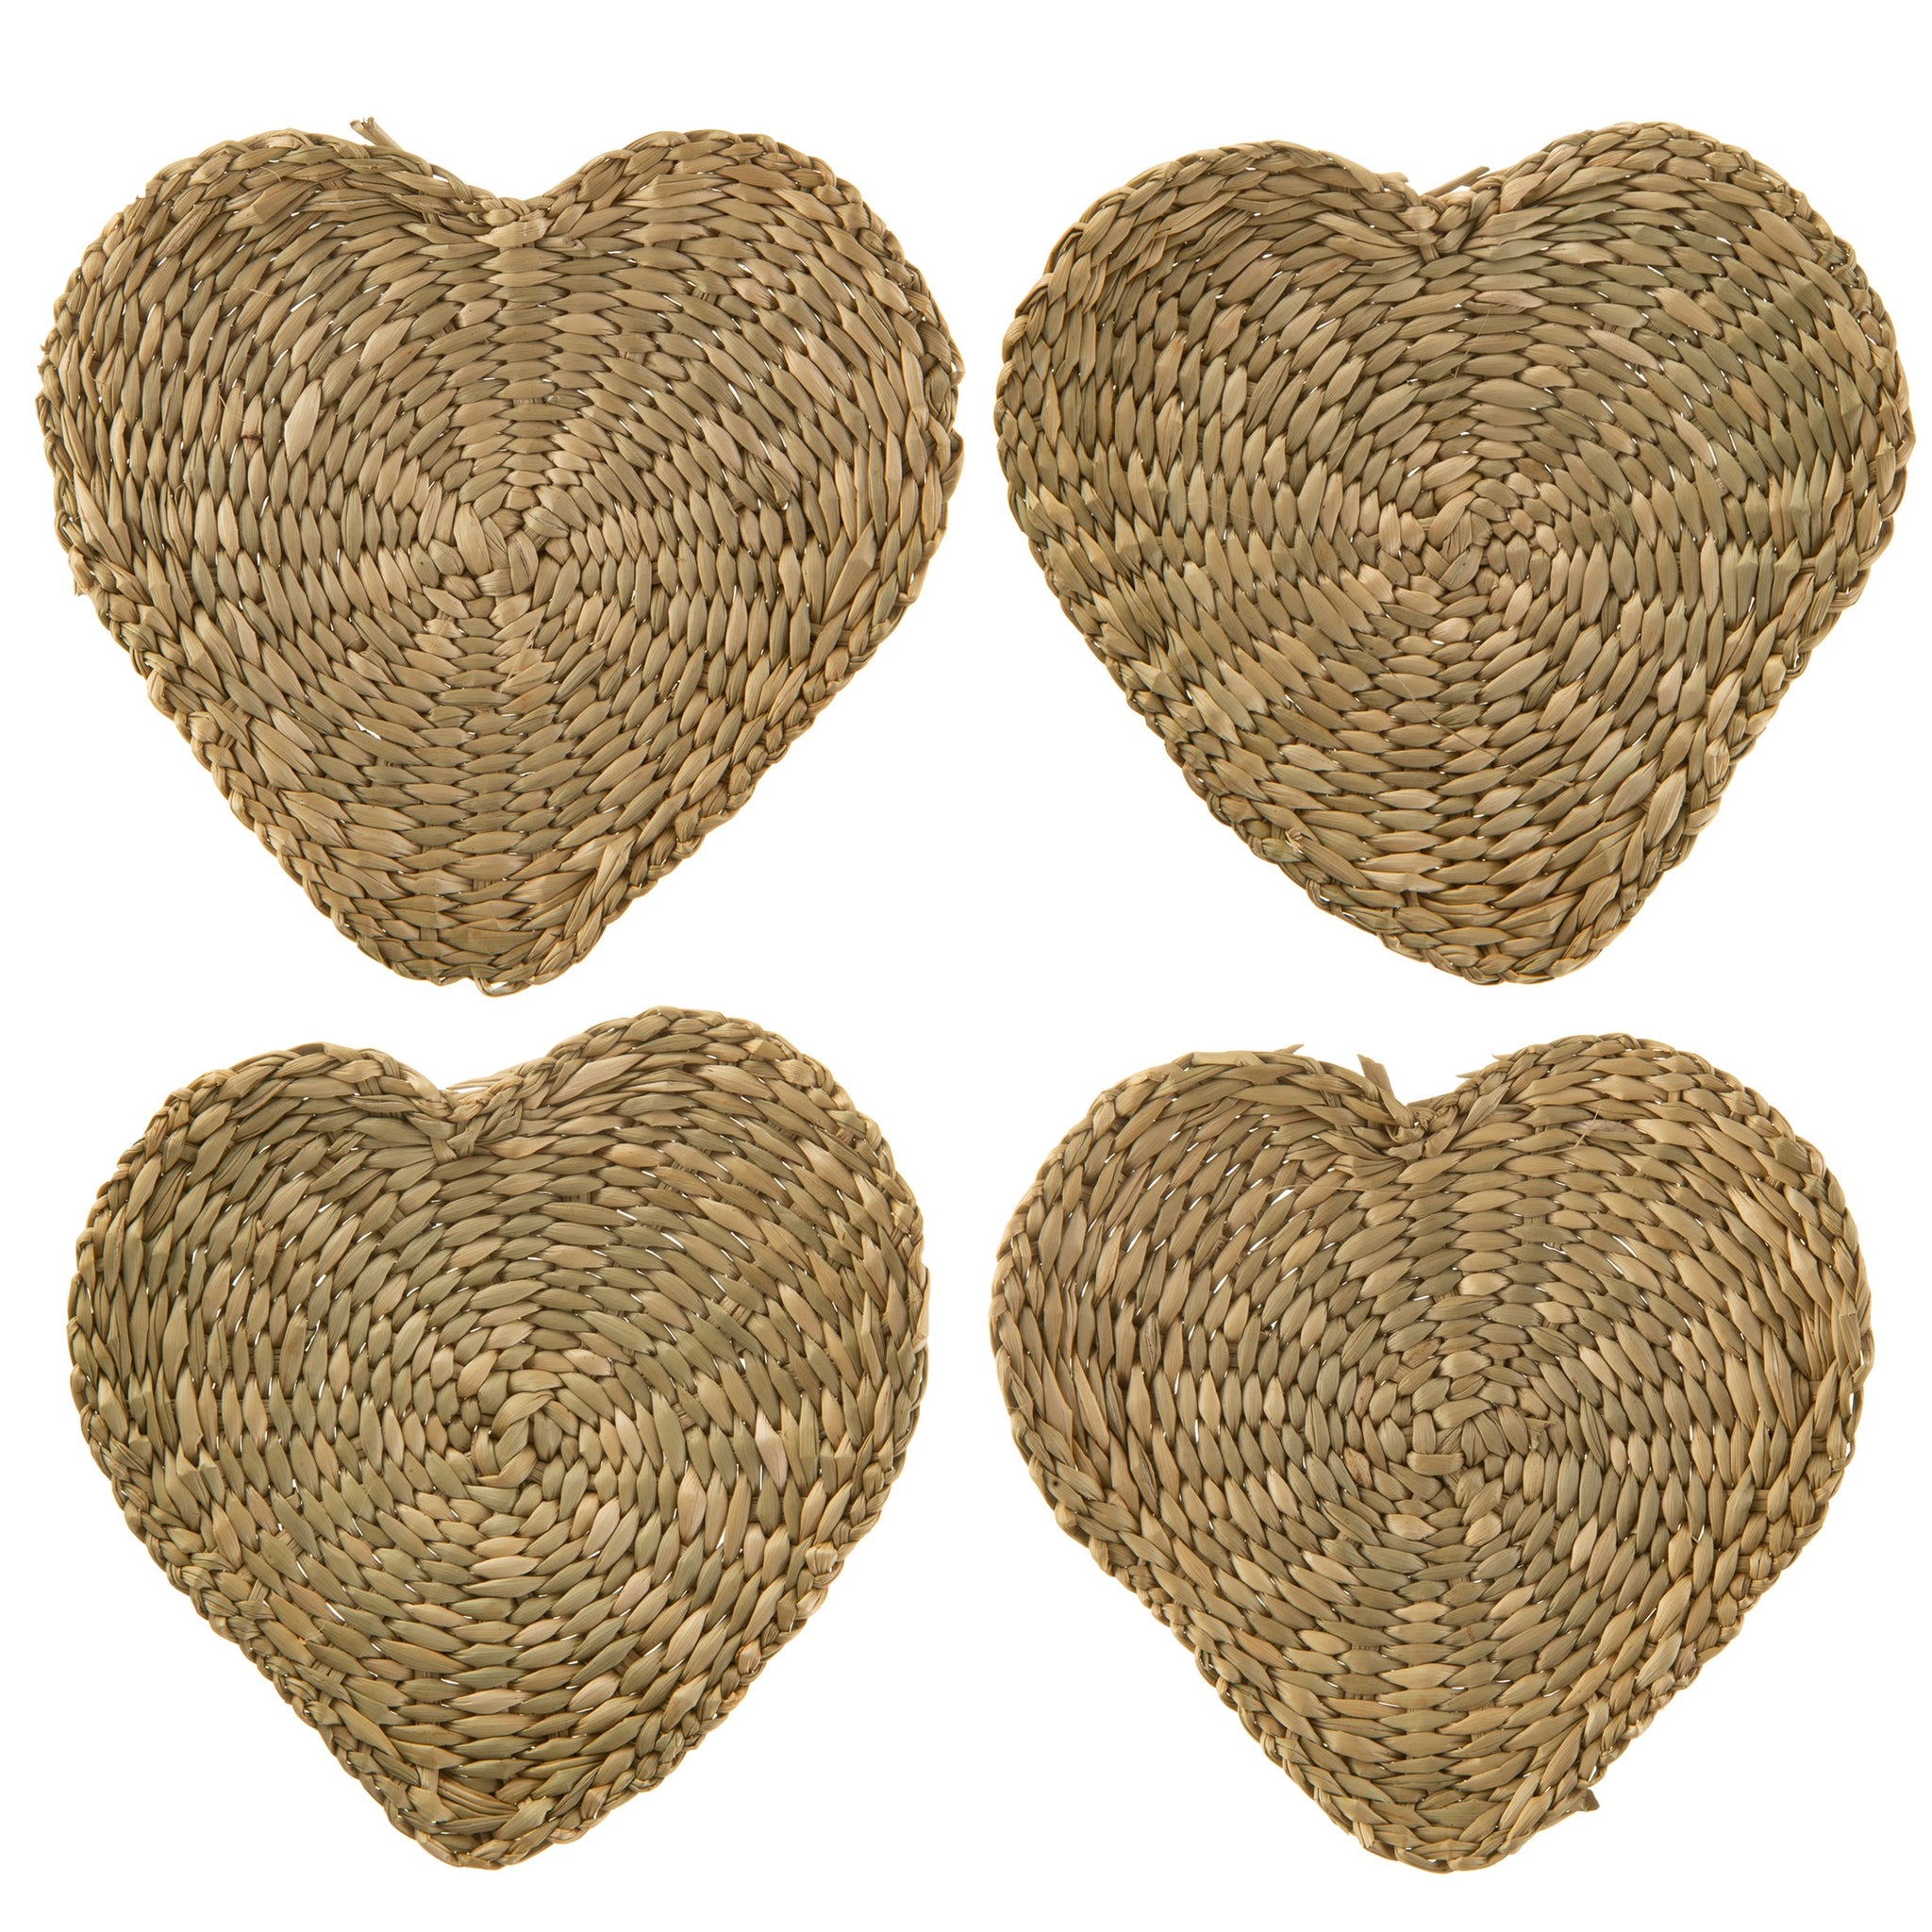 Heart Seagrass Coasters - Set of 4